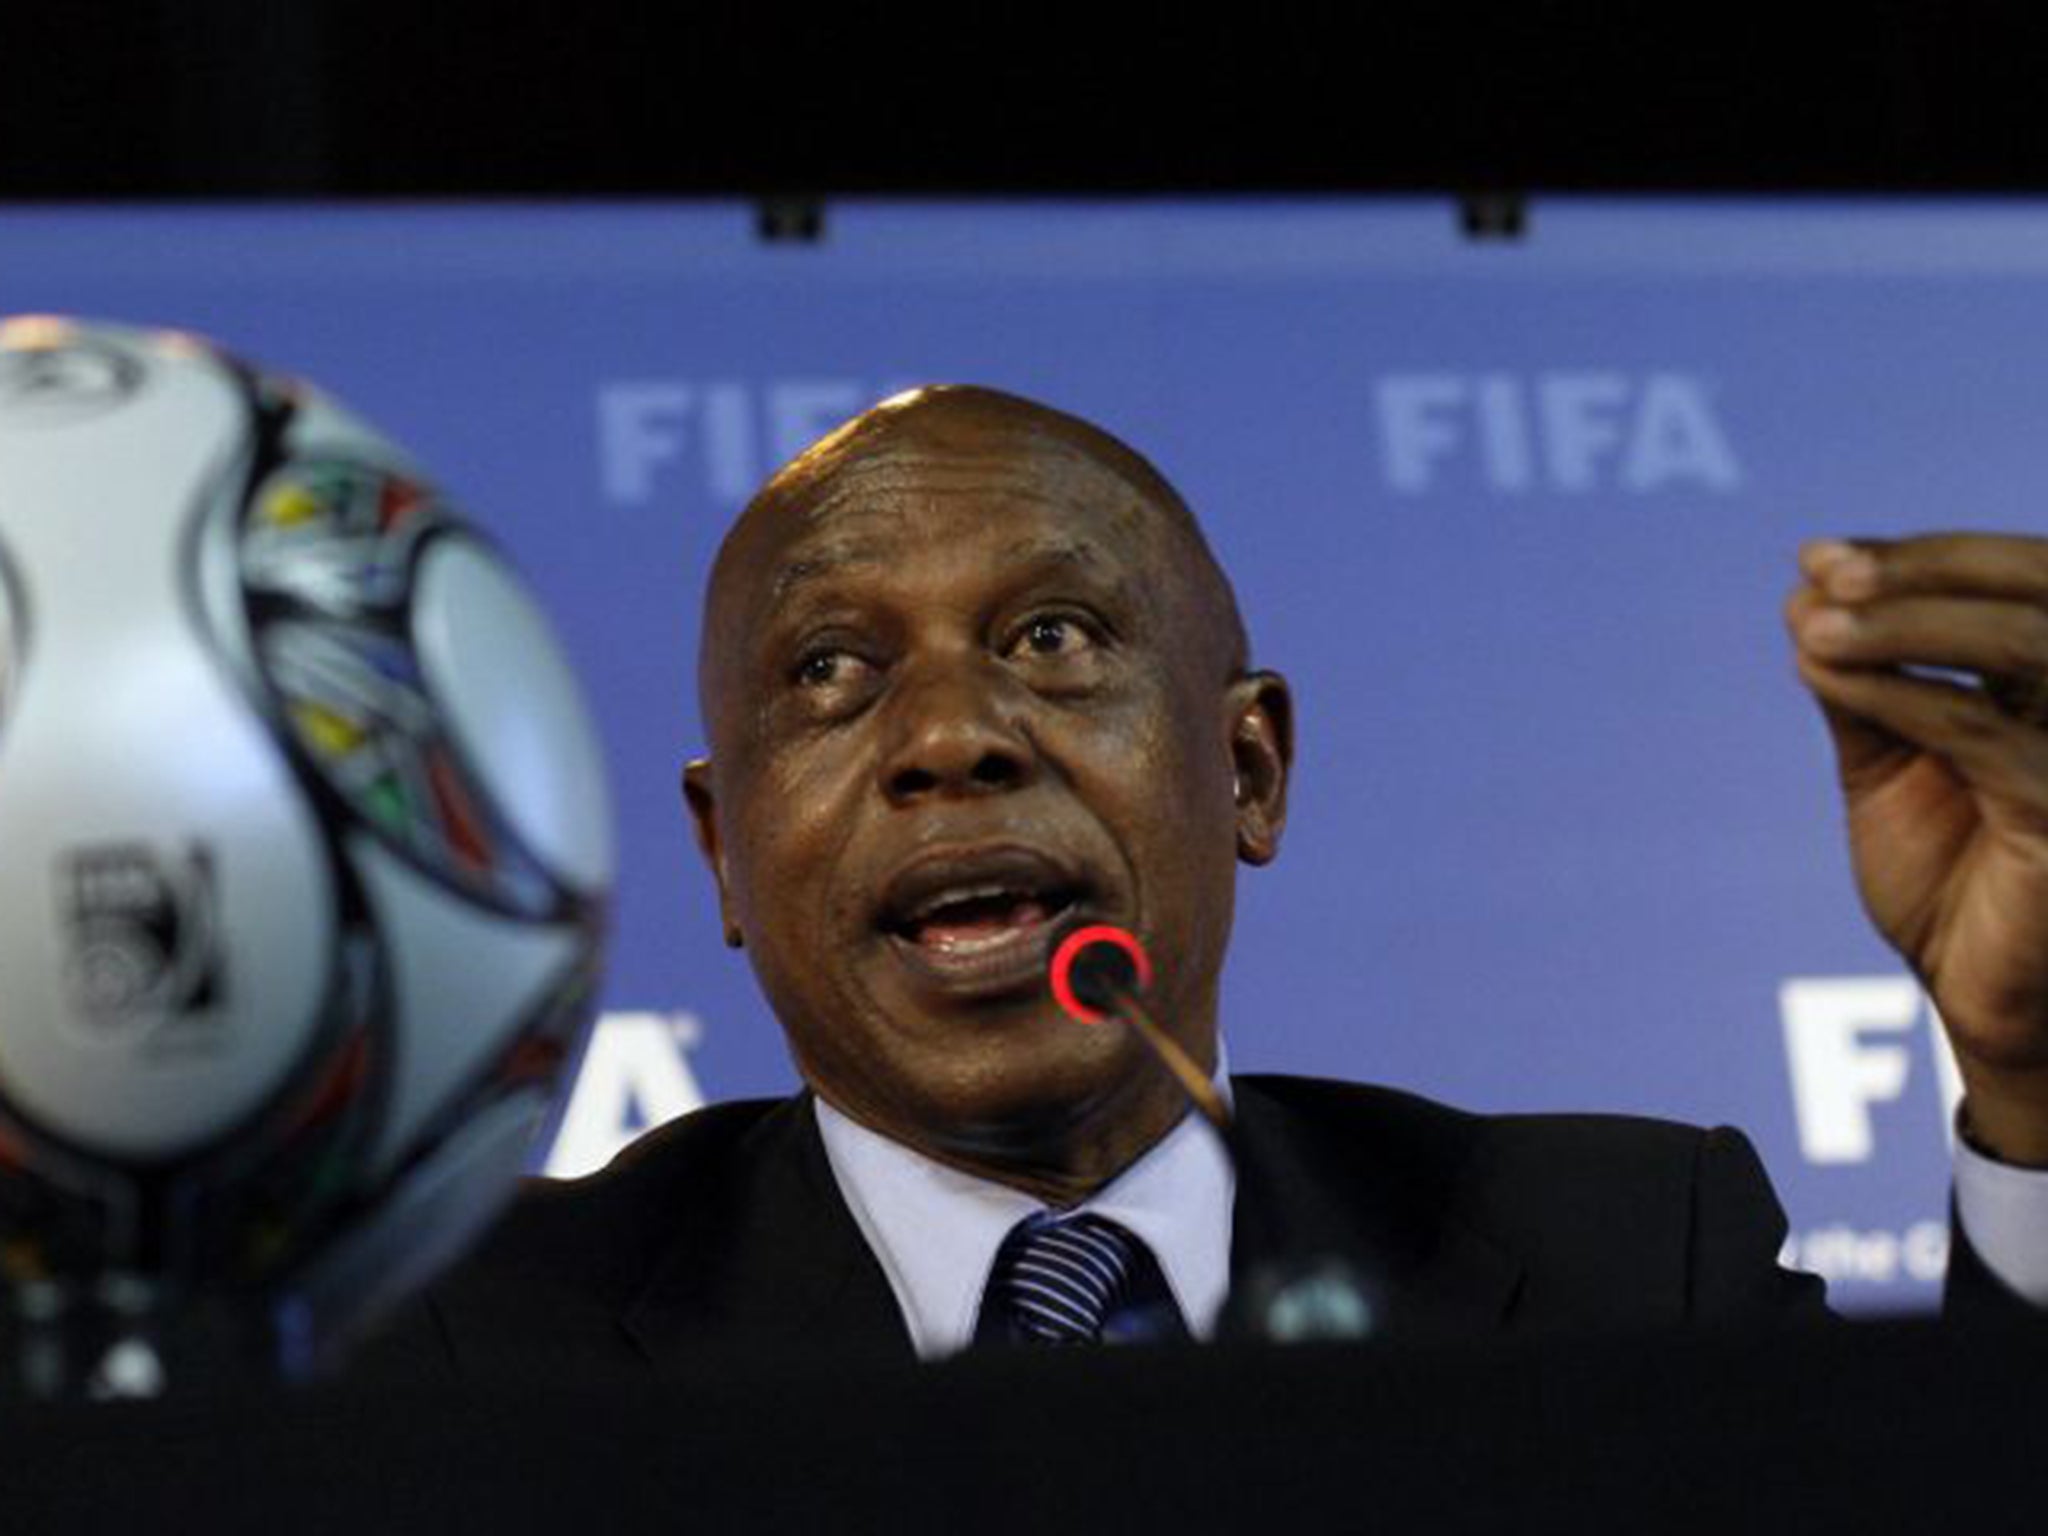 Sexwale is a prominent anti-apartheid campaigner